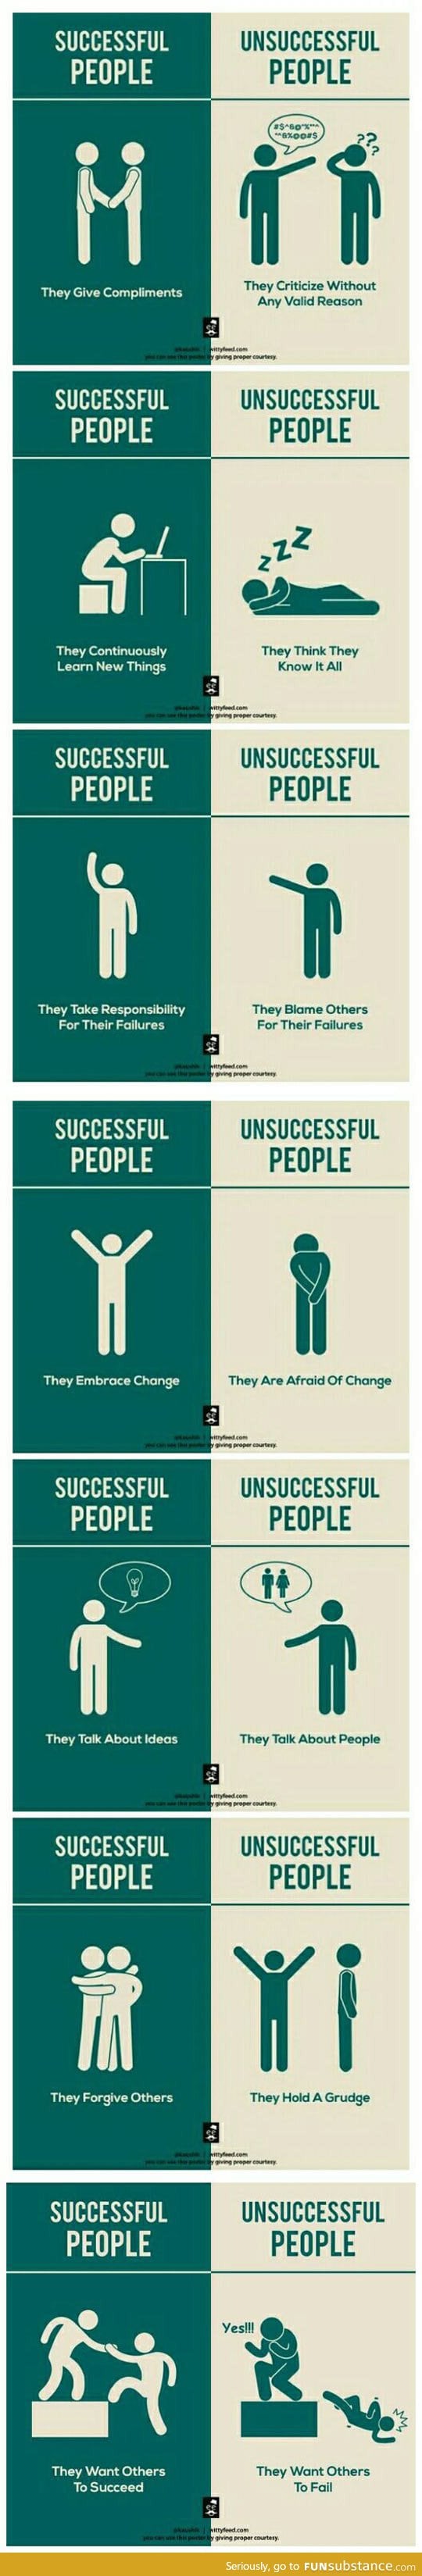 How to become a successful person